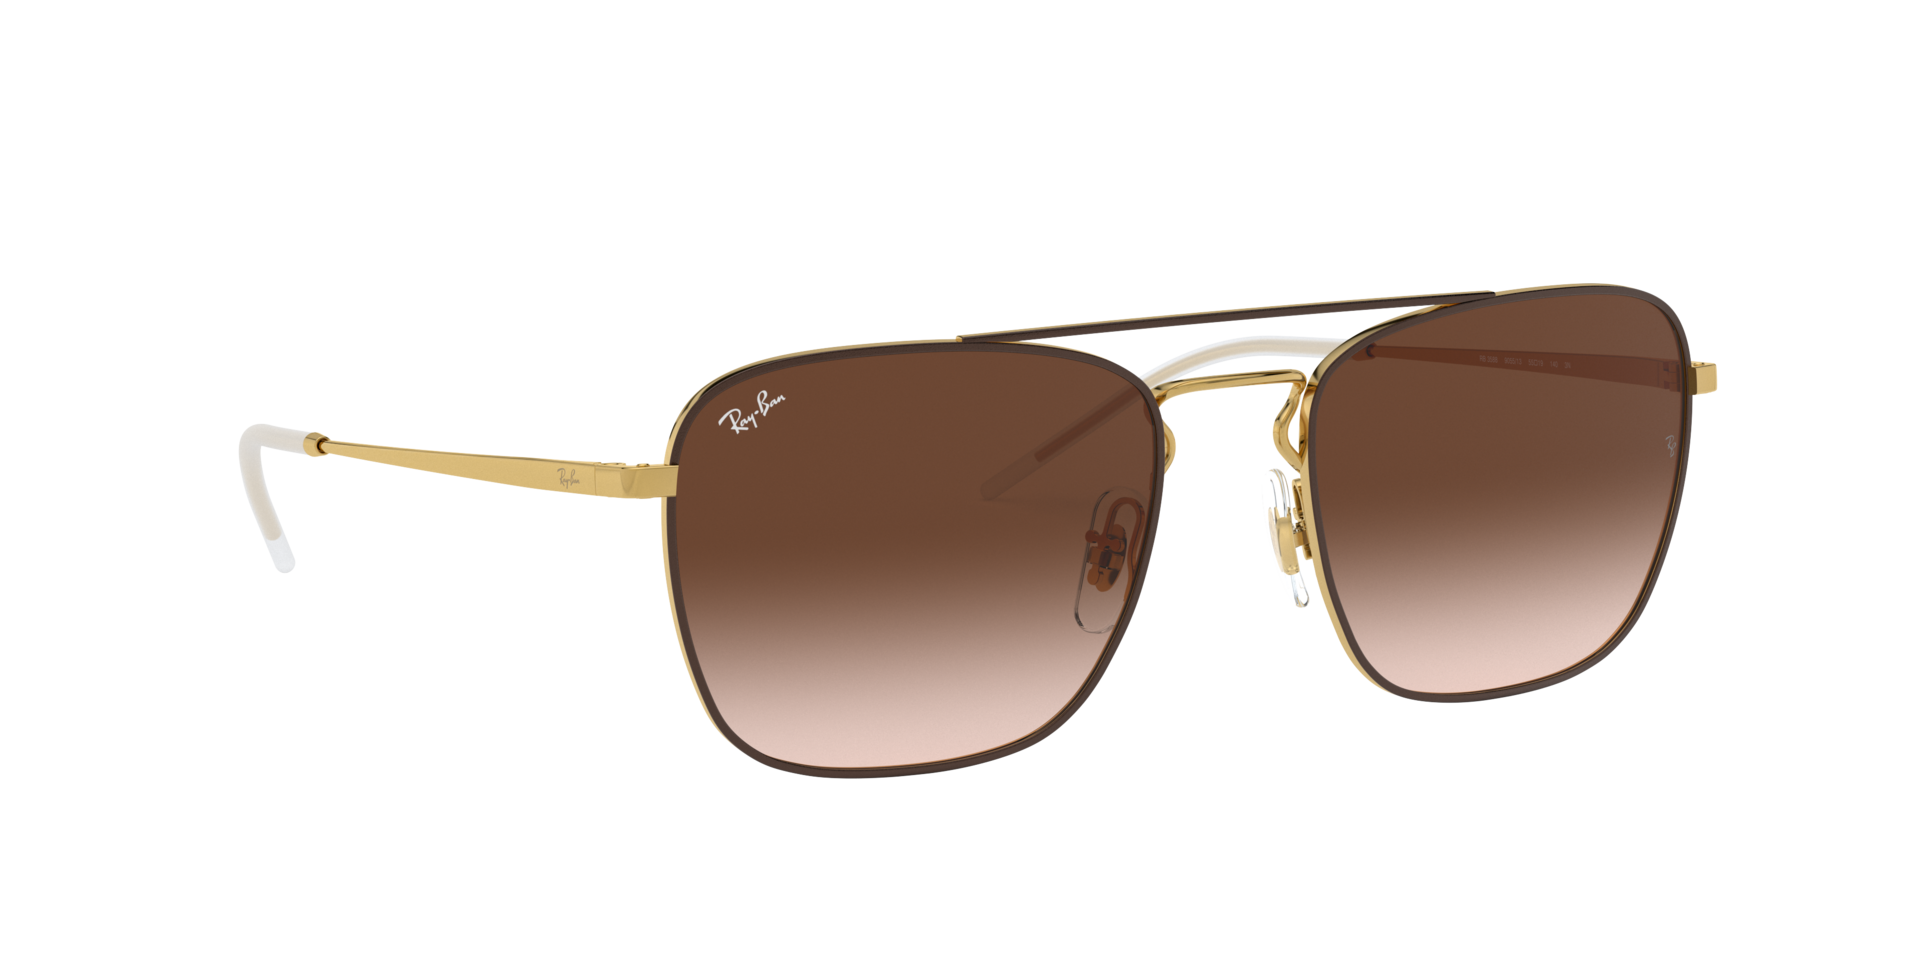 Buy Ray-Ban Rb3588 Sunglasses Online.